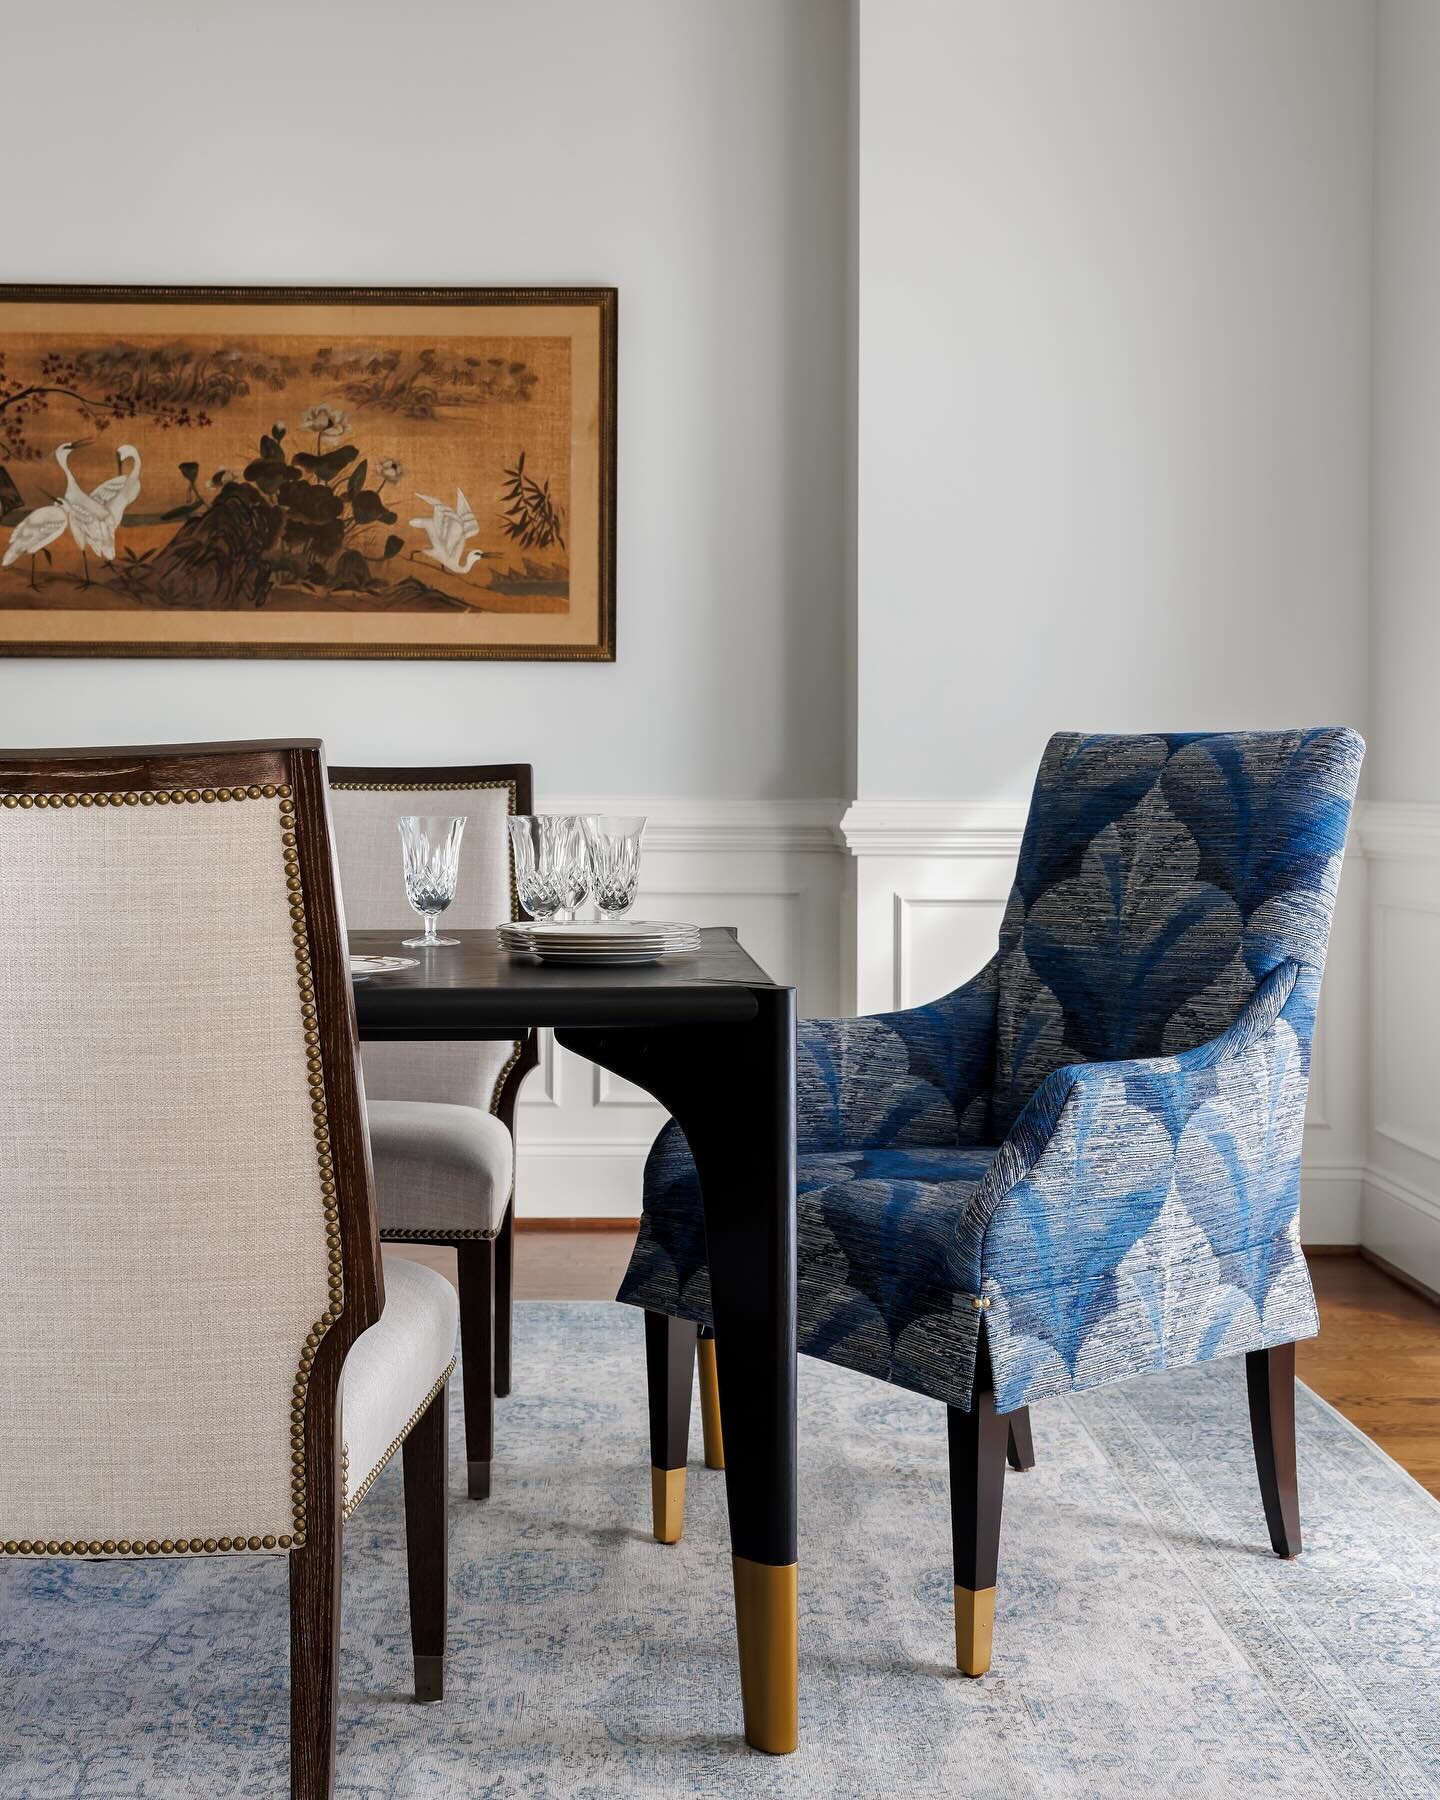 The pattern on this chair stole our hearts and now it steals the scene in this dining room that we designed for beauty, comfort and function. These same chairs can easily be moved to the other end of the room for use at a little game table in the bay